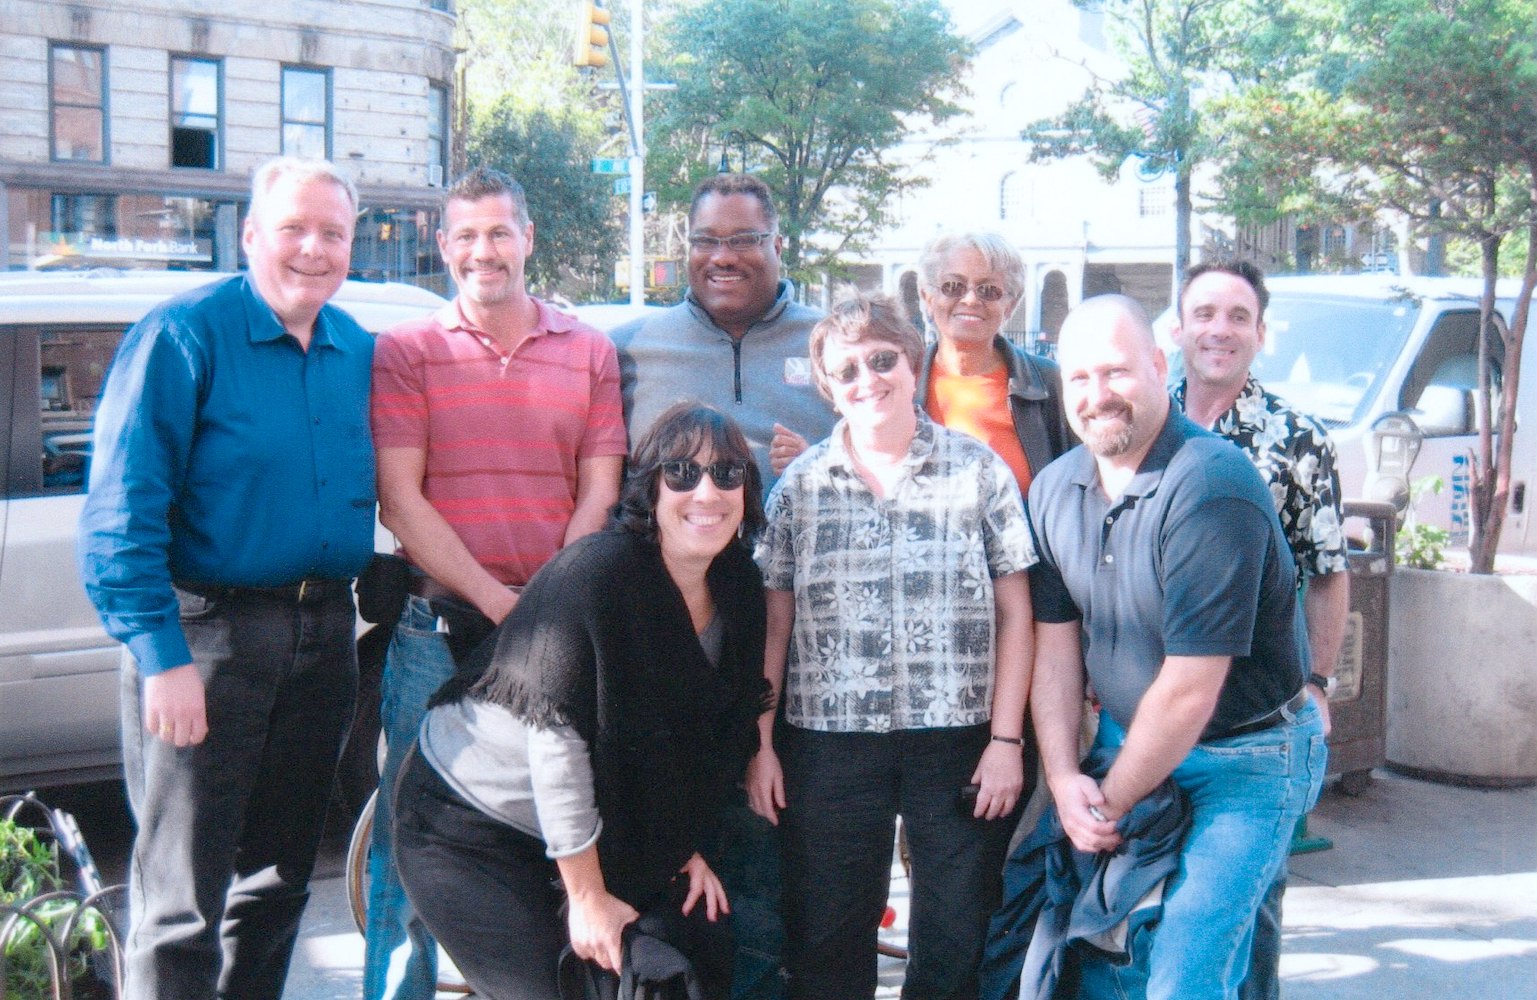 Kathie Hiers and the National AIDS Housing Coalition in New York, NY, 2005. Photo courtesy of Kathie Hiers.